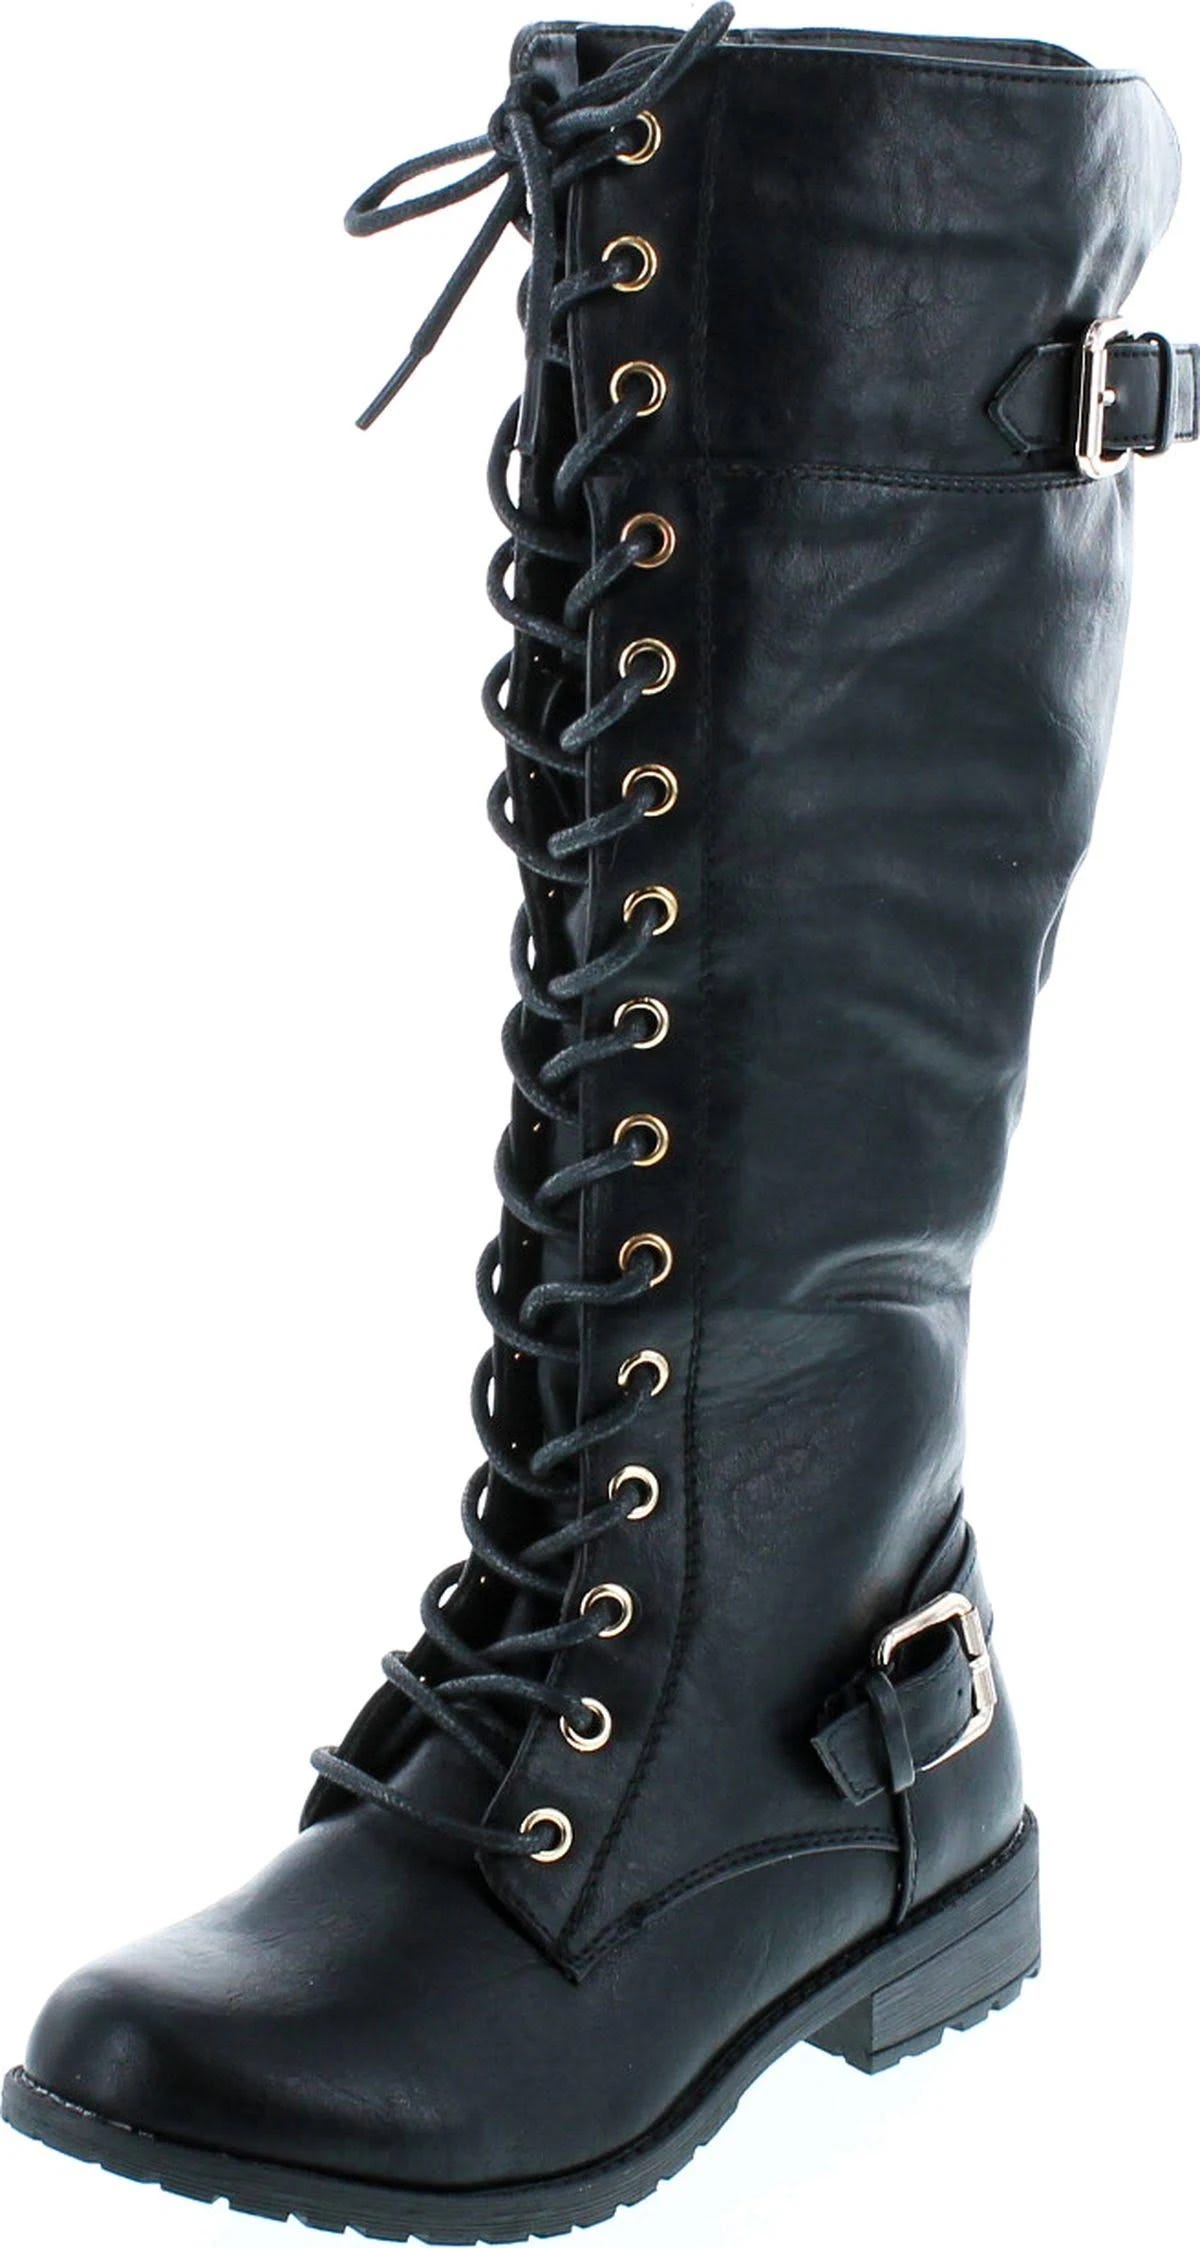 Stylish Knee-High Chunky Heel Boot with Padded Footbed and Zipper Closure | Image